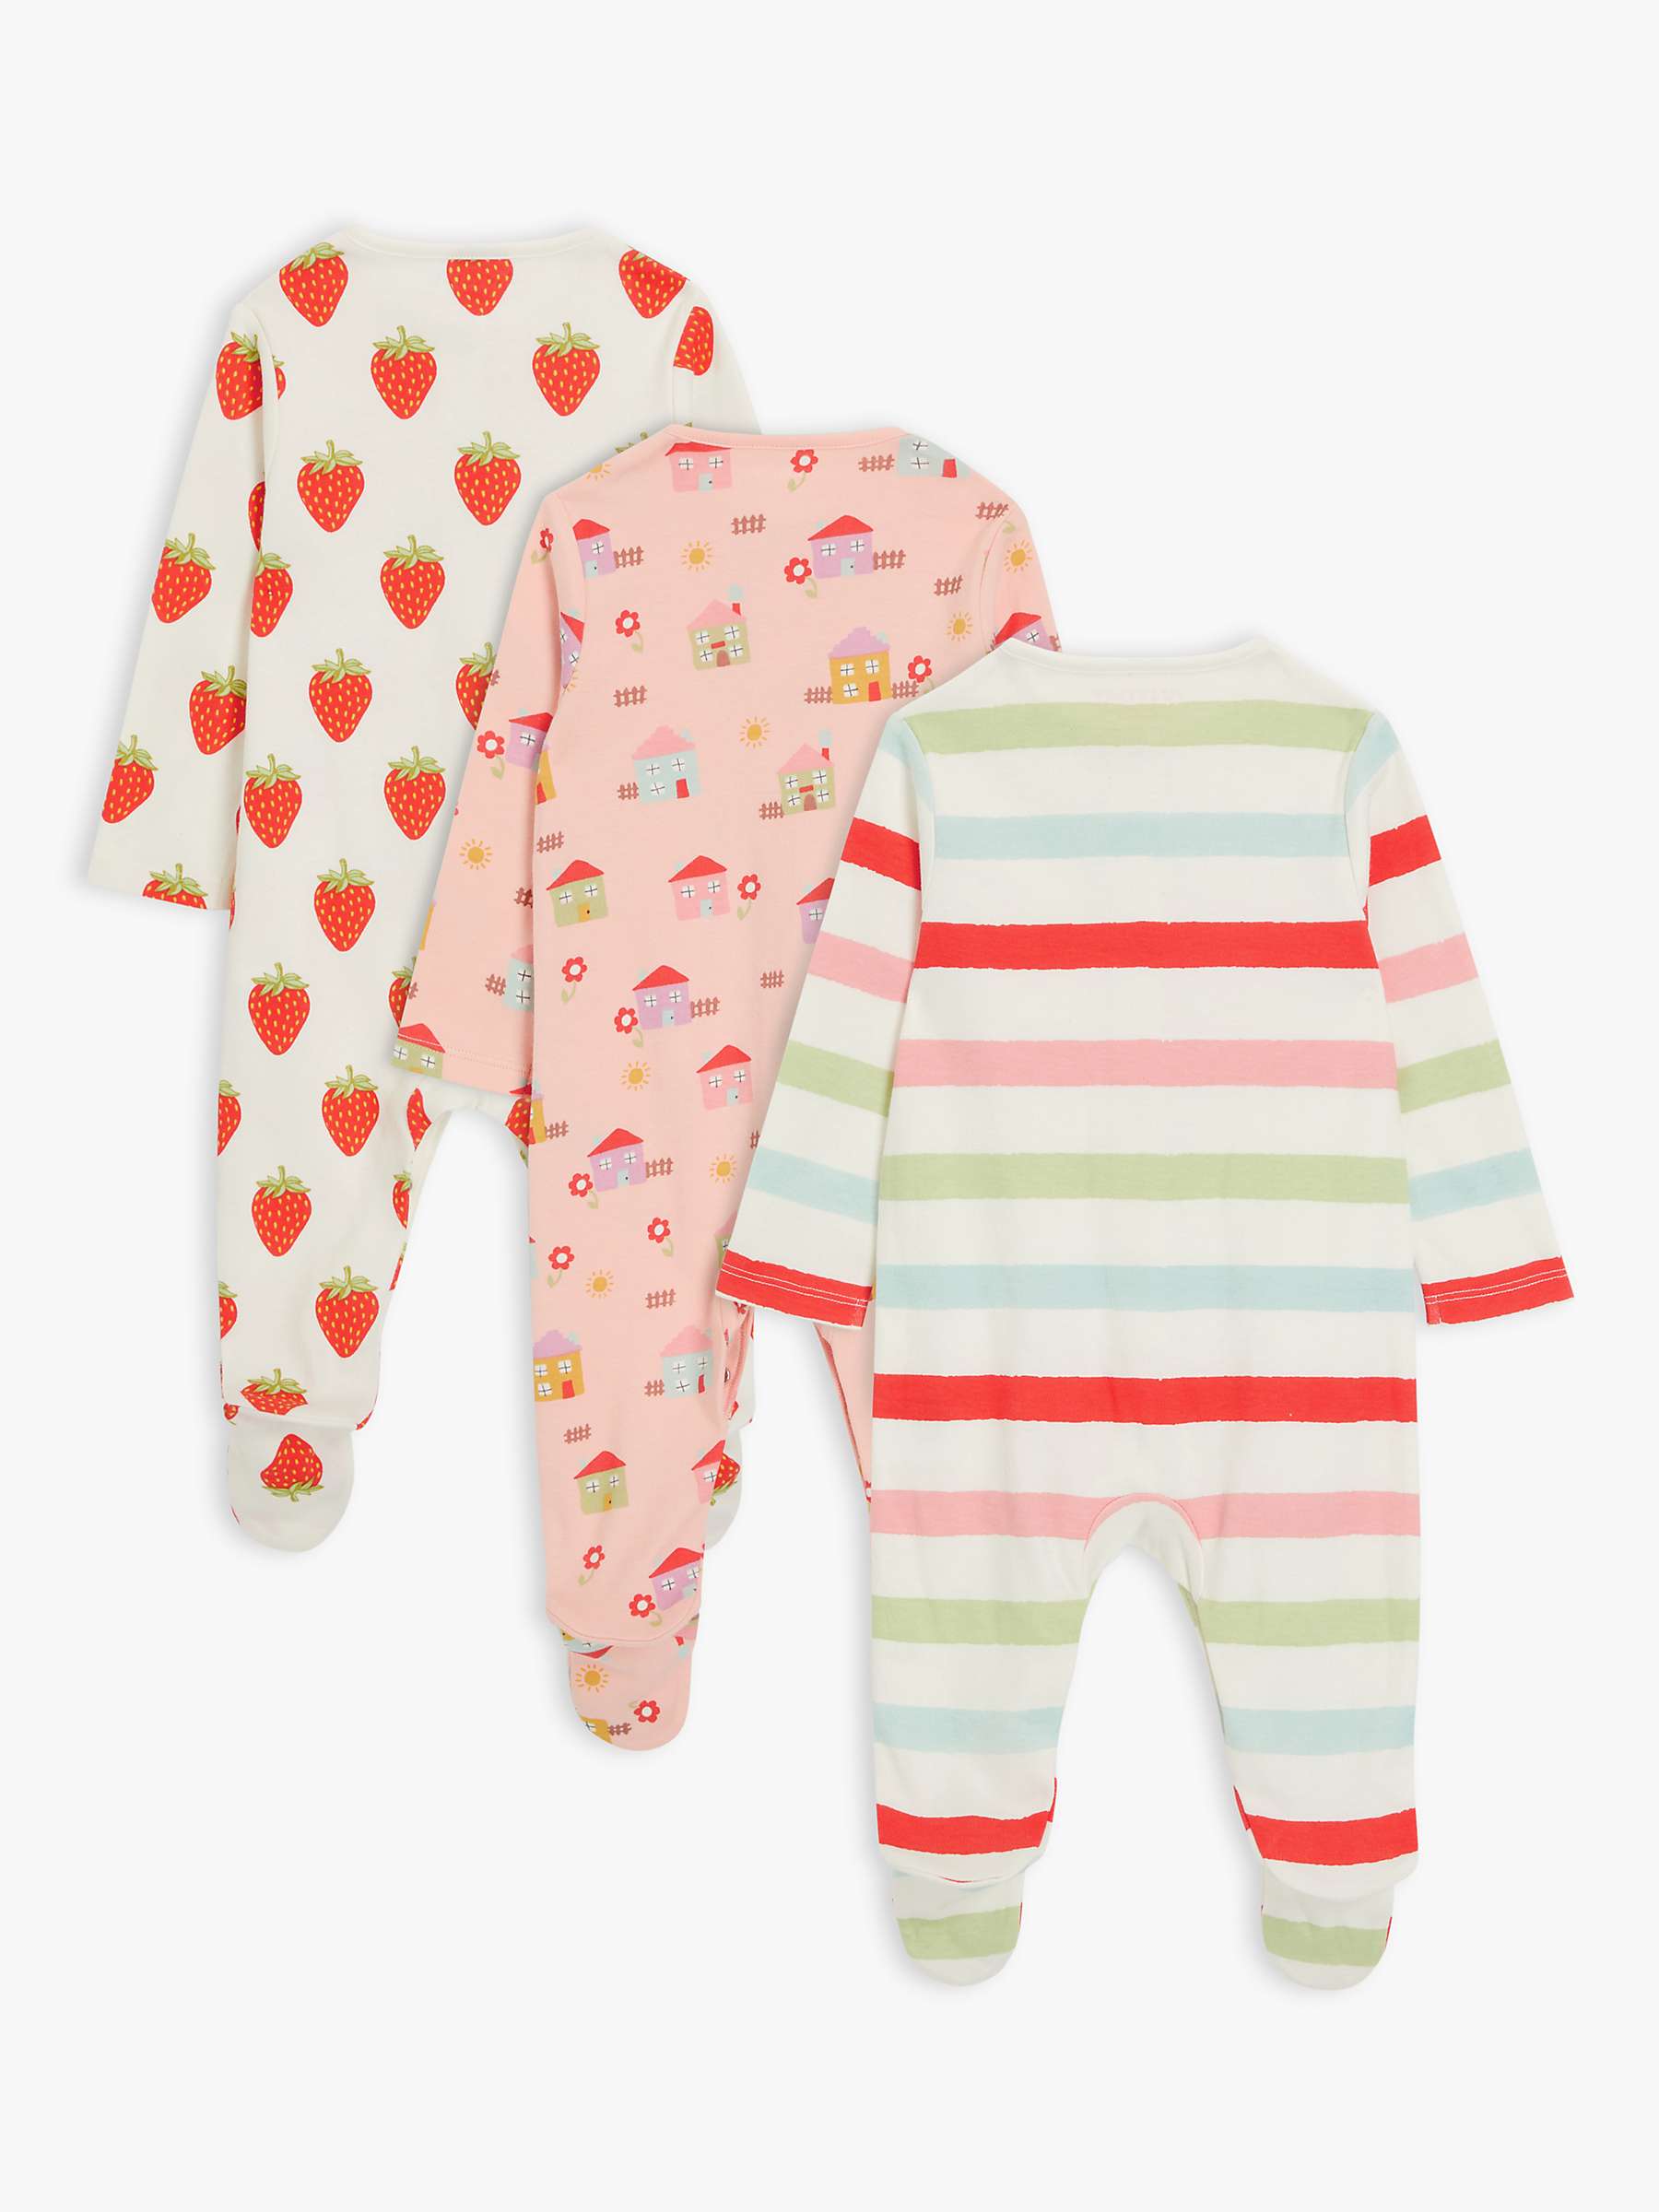 Buy John Lewis ANYDAY Baby Strawberry Houses Mix Sleepsuit, Pack of 3 Online at johnlewis.com